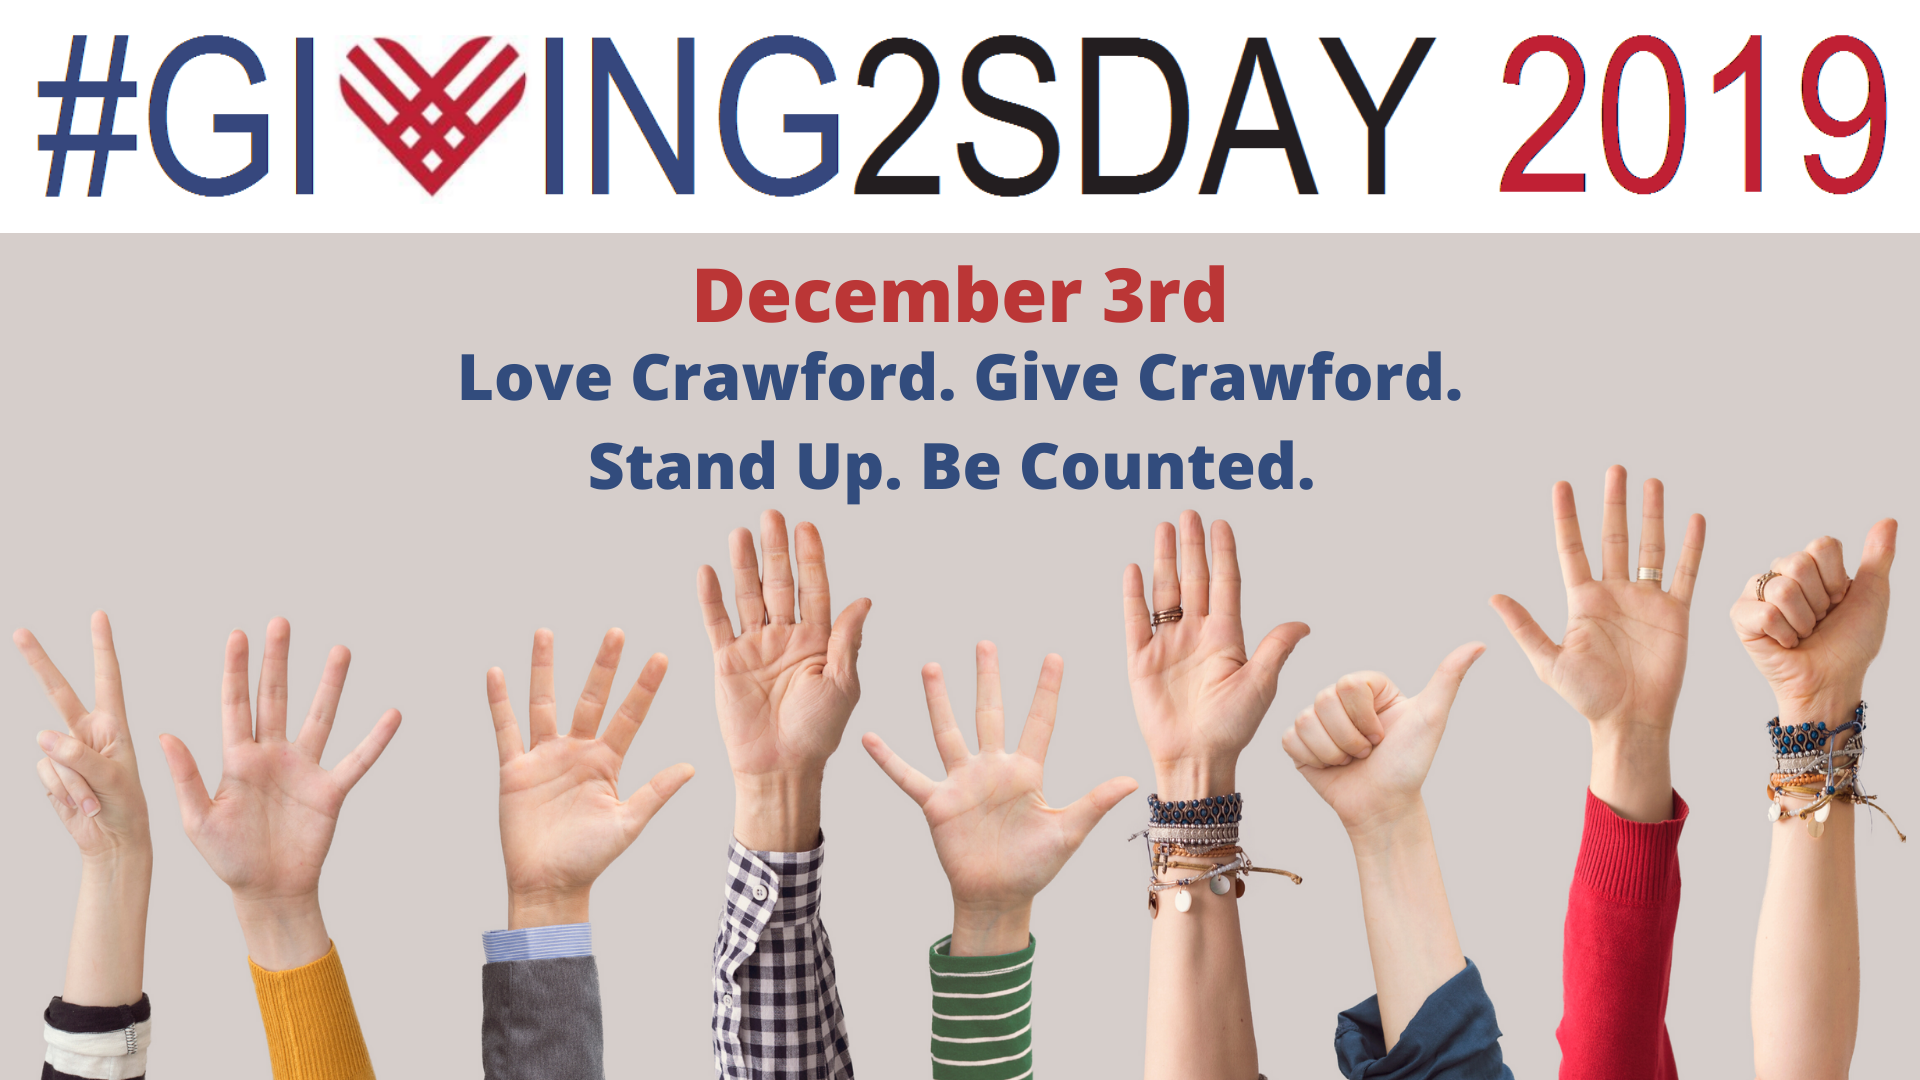 2019 NFG #Giving2sday Header Pic for Facebook Event2